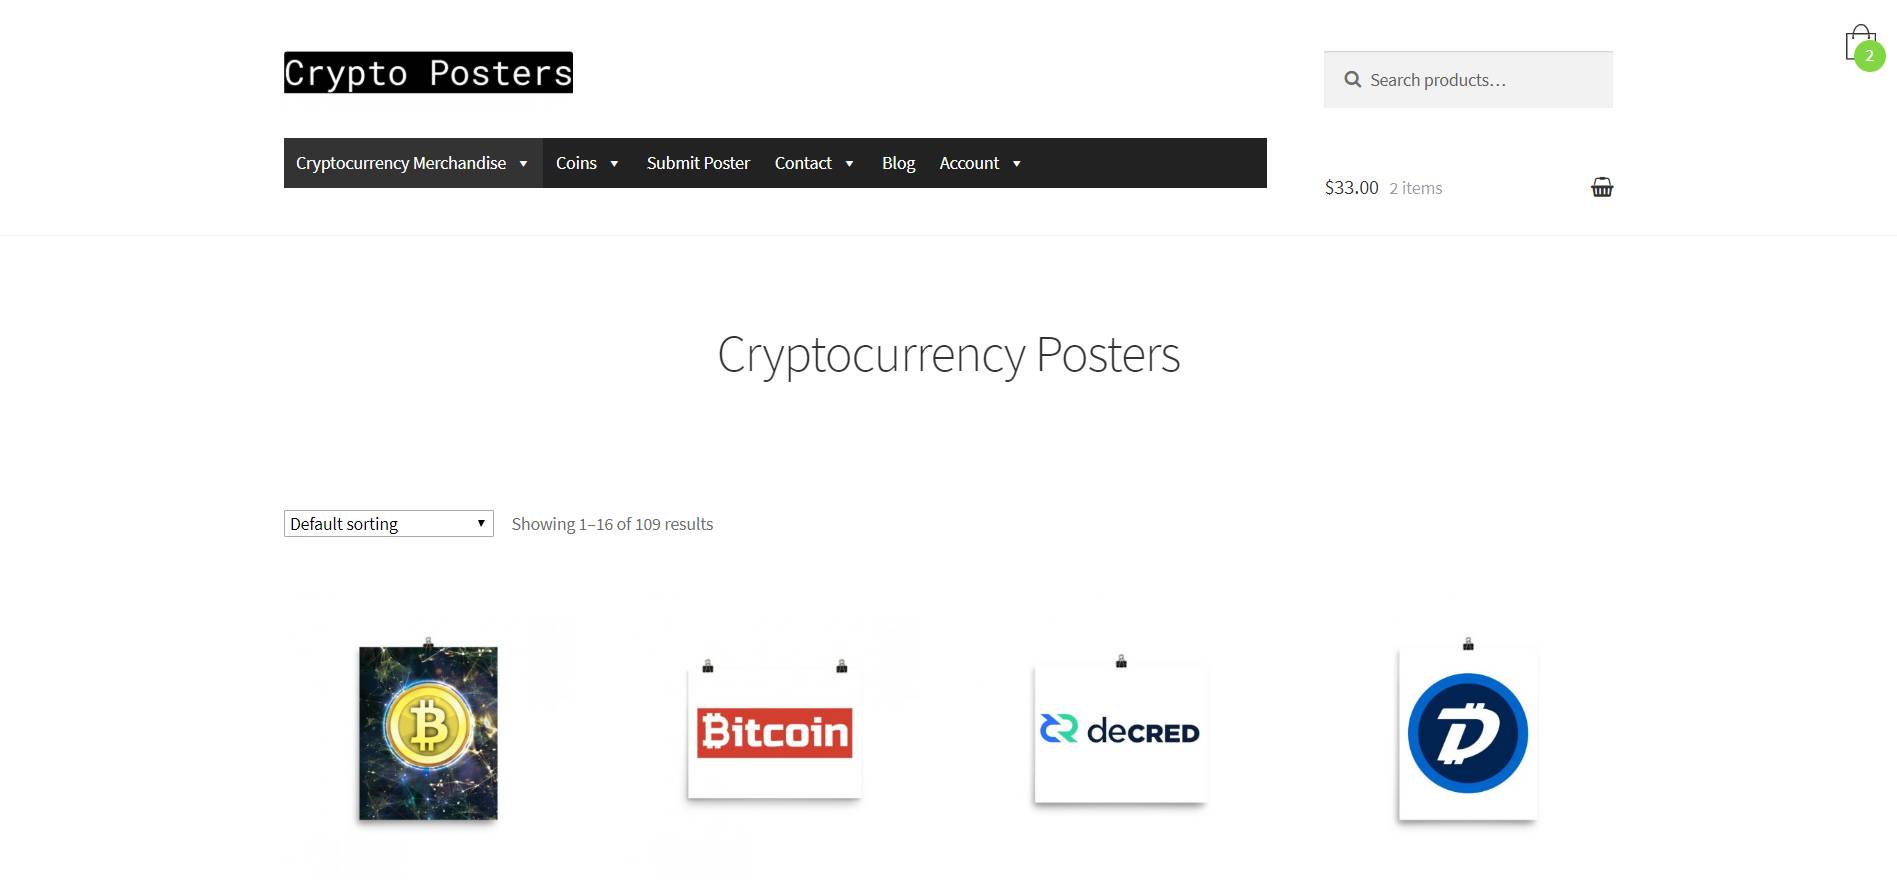 Cryptocurrency Posters